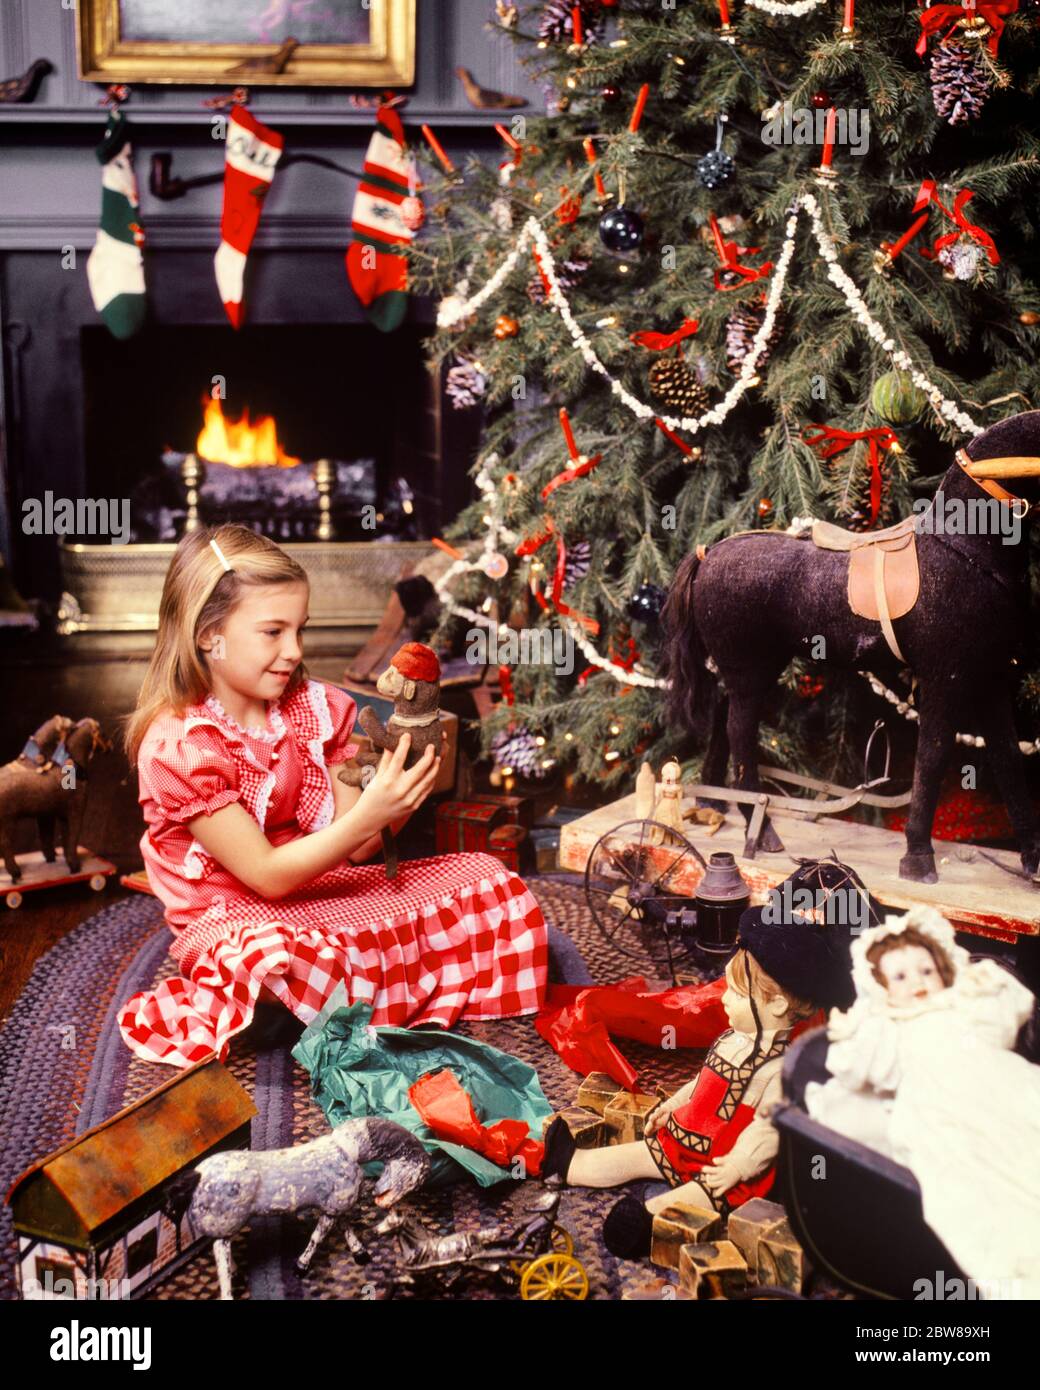 1970s 1980s BLOND GIRL HOLDING ANTIQUE TOY MONKEY BY TRADITIONAL CHRISTMAS TREE FIREPLACE ANTIQUE TOYS ALL AROUND TREE  - kx8812 PHT001 HARS SATISFACTION CELEBRATION FEMALES RURAL HEAT HOME LIFE COPY SPACE HALF-LENGTH INSPIRATION TRADITIONAL CARING DREAMS HAPPINESS DISCOVERY MERRY PORCELAIN EXCITEMENT MODELS TRADITION DECEMBER CONCEPTUAL DECEMBER 25 WARMTH ESTABLISHED STYLISH CHRISTMAS TREE COLLECTIBLES JOYOUS JUVENILES CAUCASIAN ETHNICITY COLLECTIBLE OLD FASHIONED RED AND WHITE Stock Photo